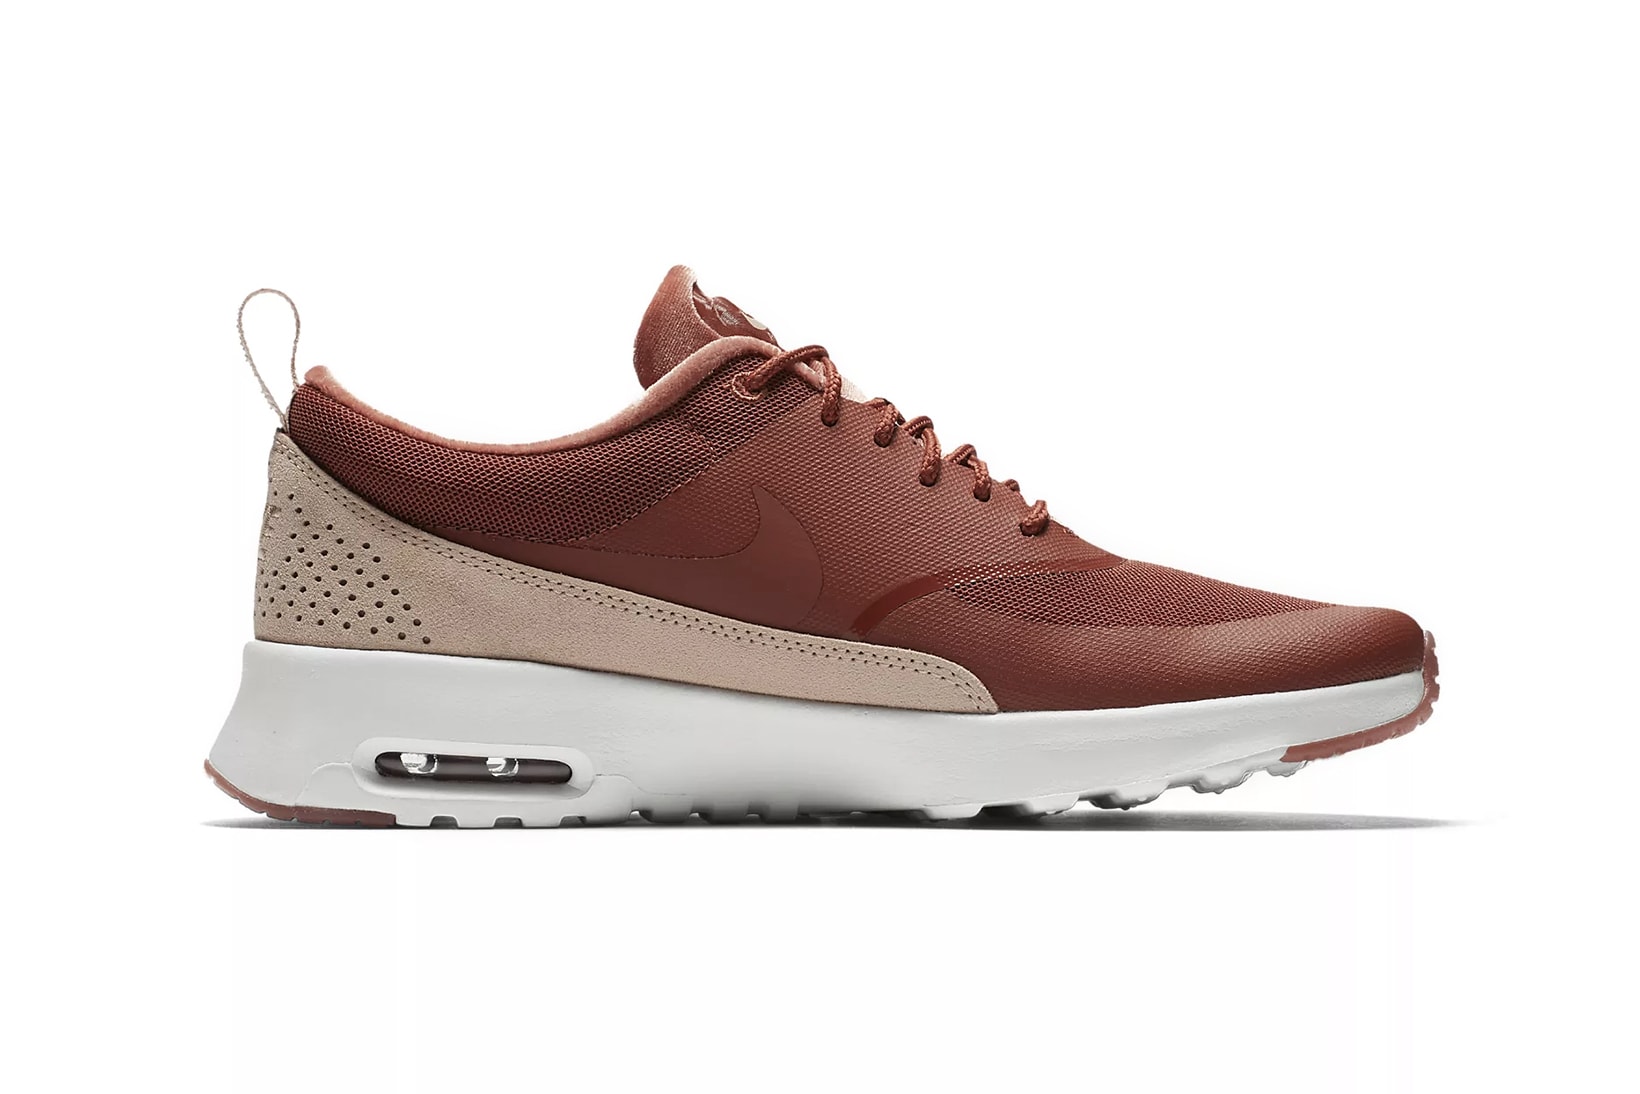 Nike Air Max Thea LX Dusty Peach Velvet Pink Rose Gold Ladies Women's Girls Sneakers where to buy